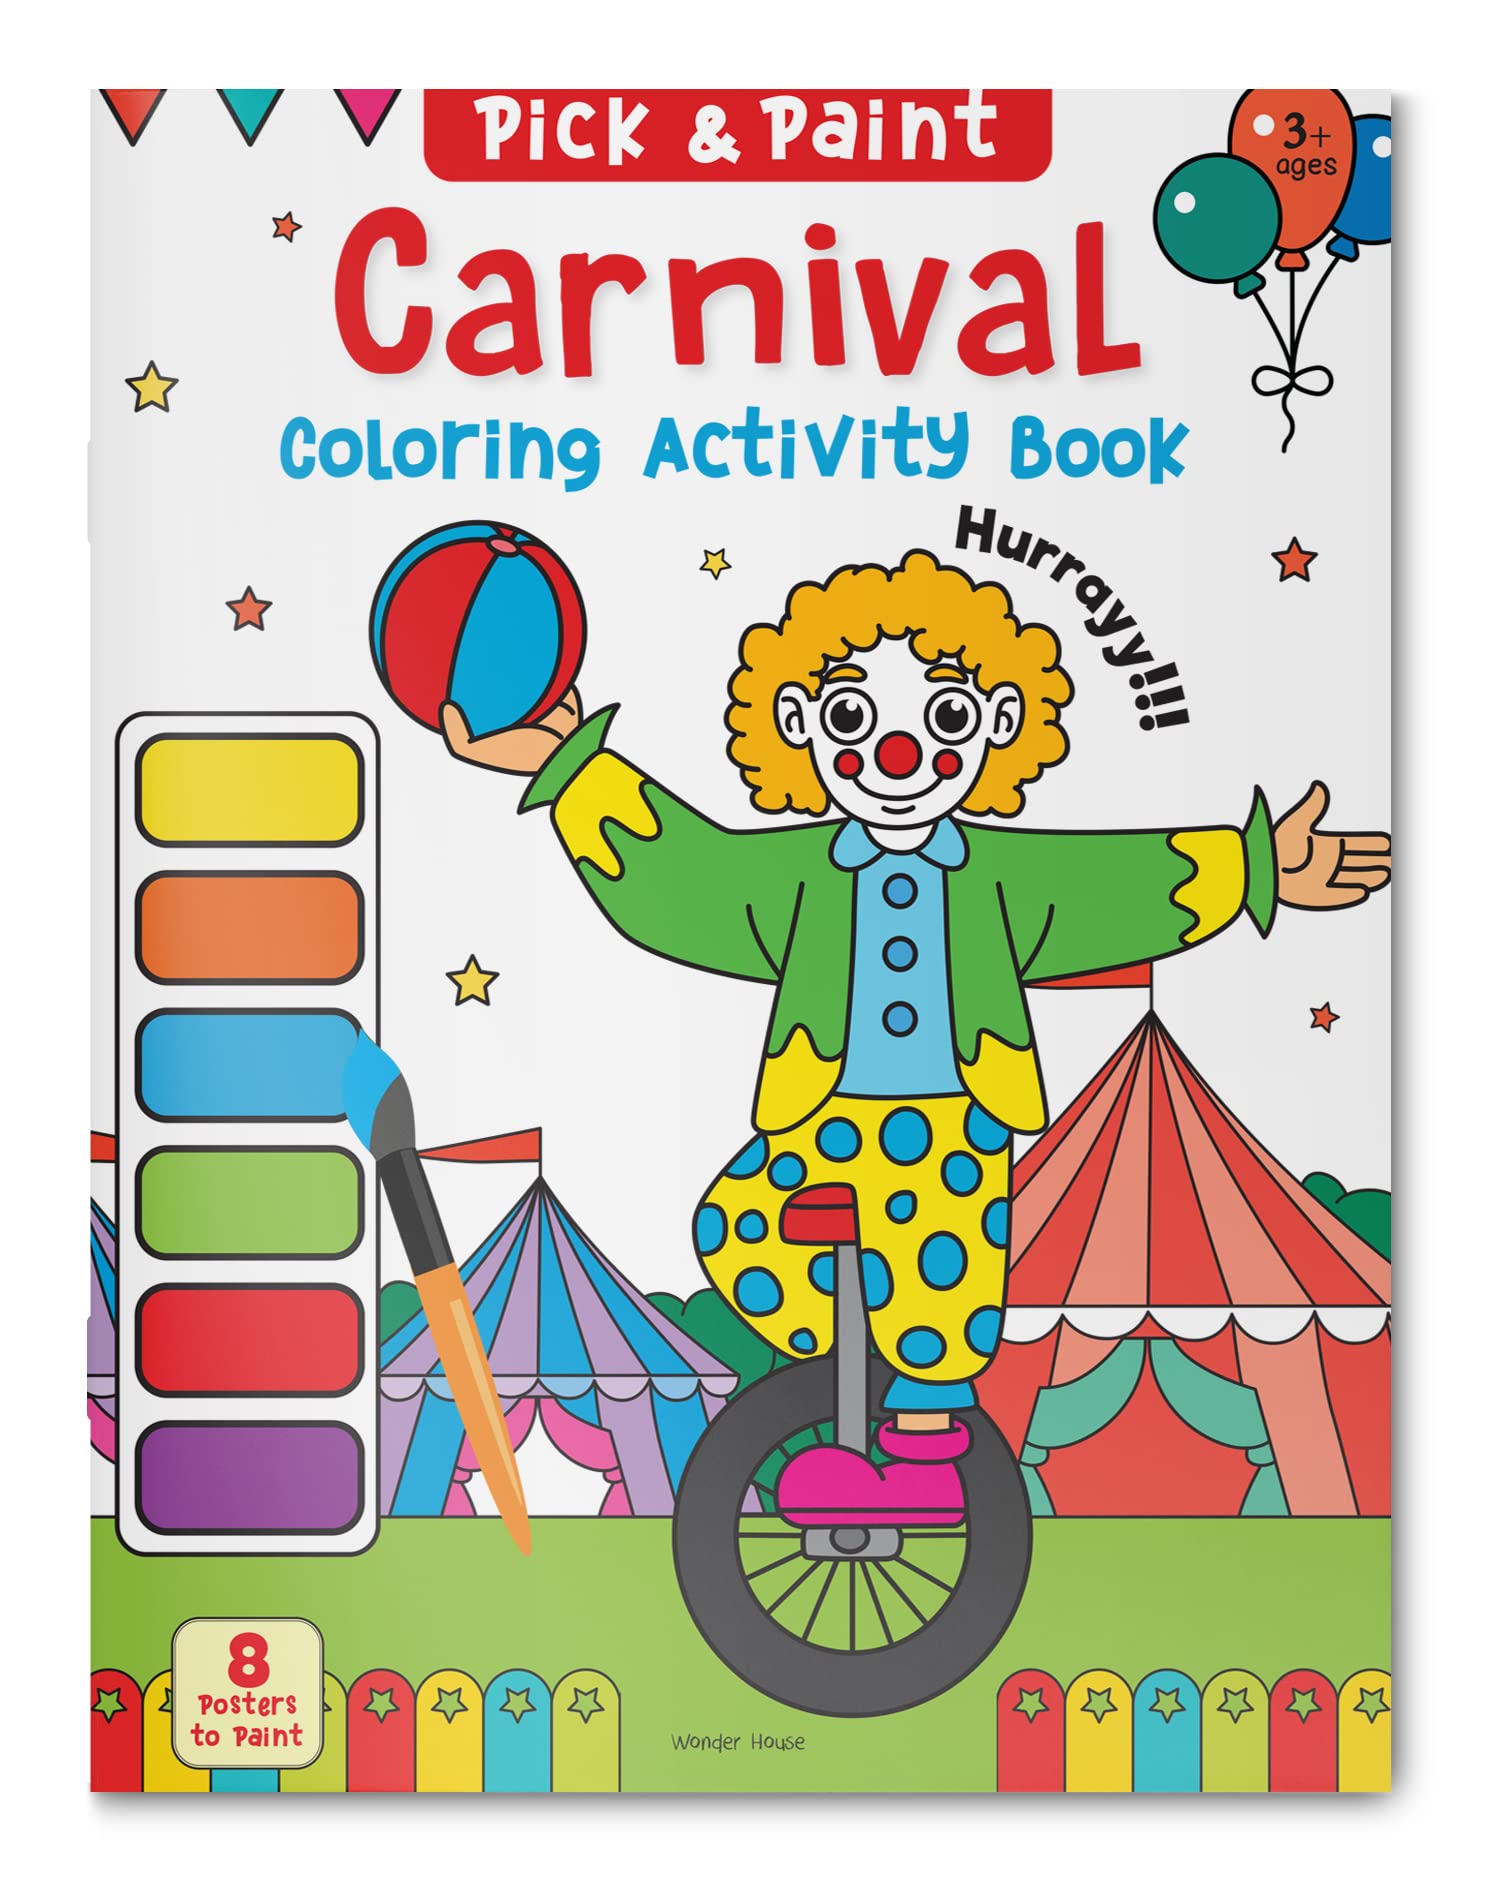 Carnival: Pick & Paint Coloring Activity Book